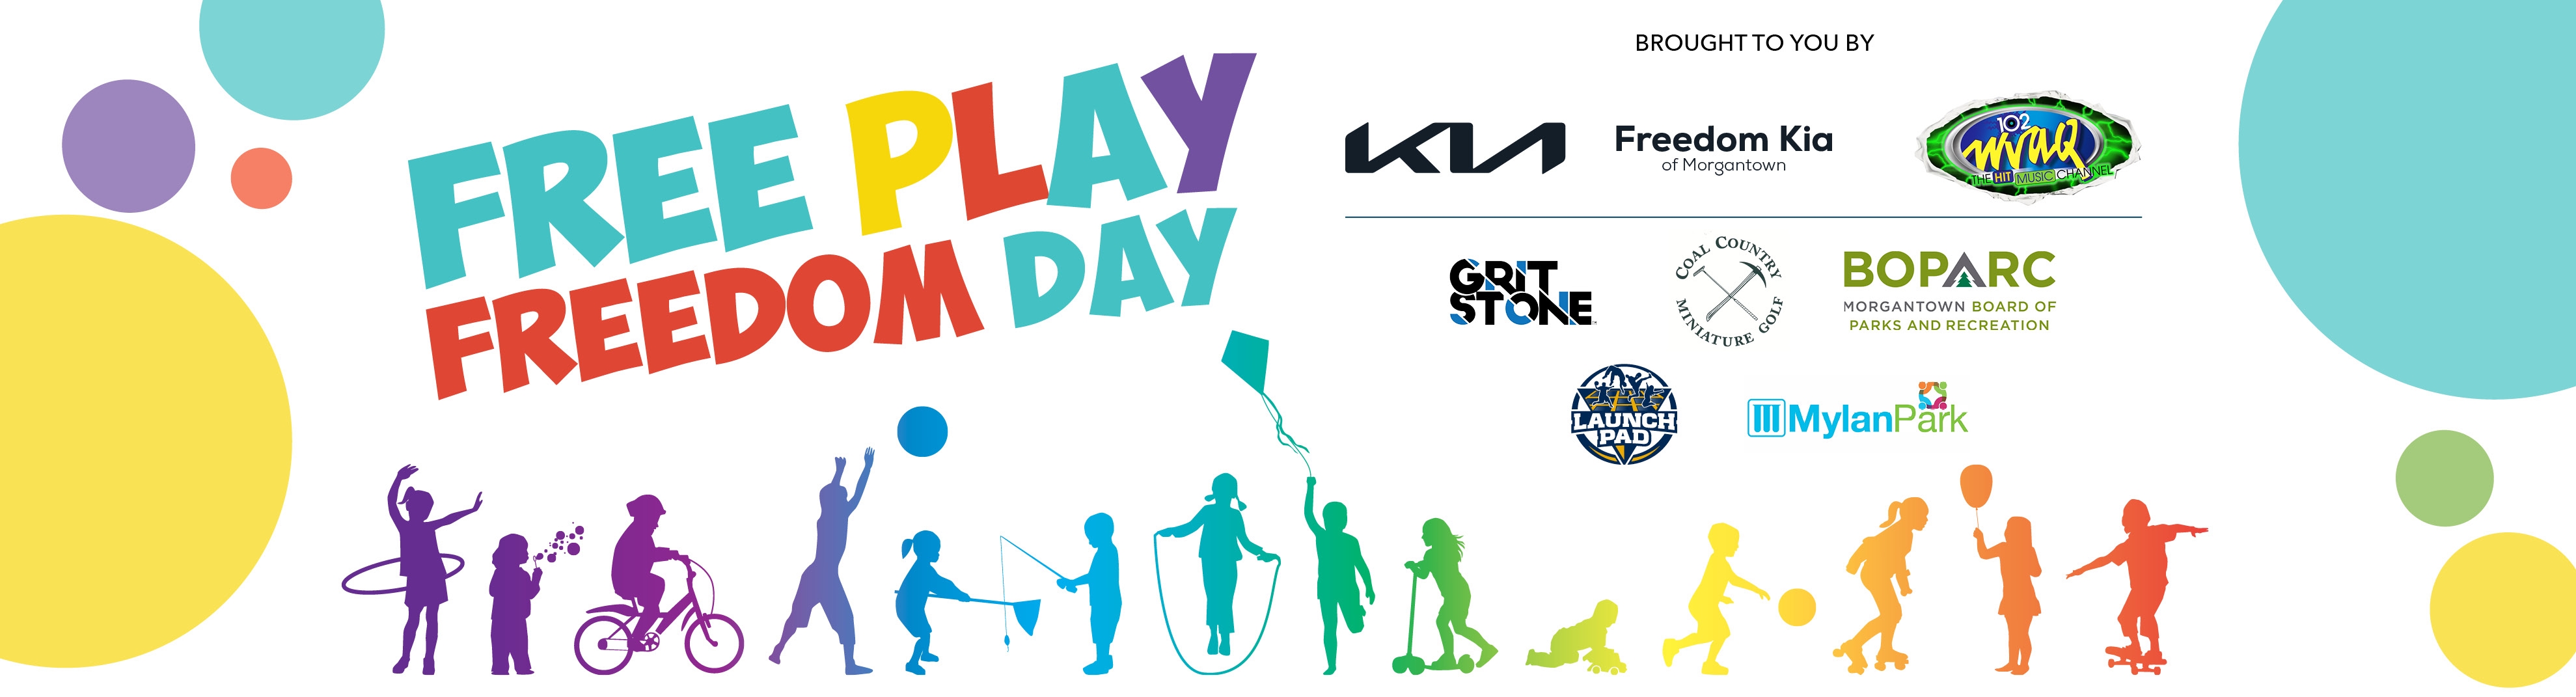 Free Play, Freedom Day